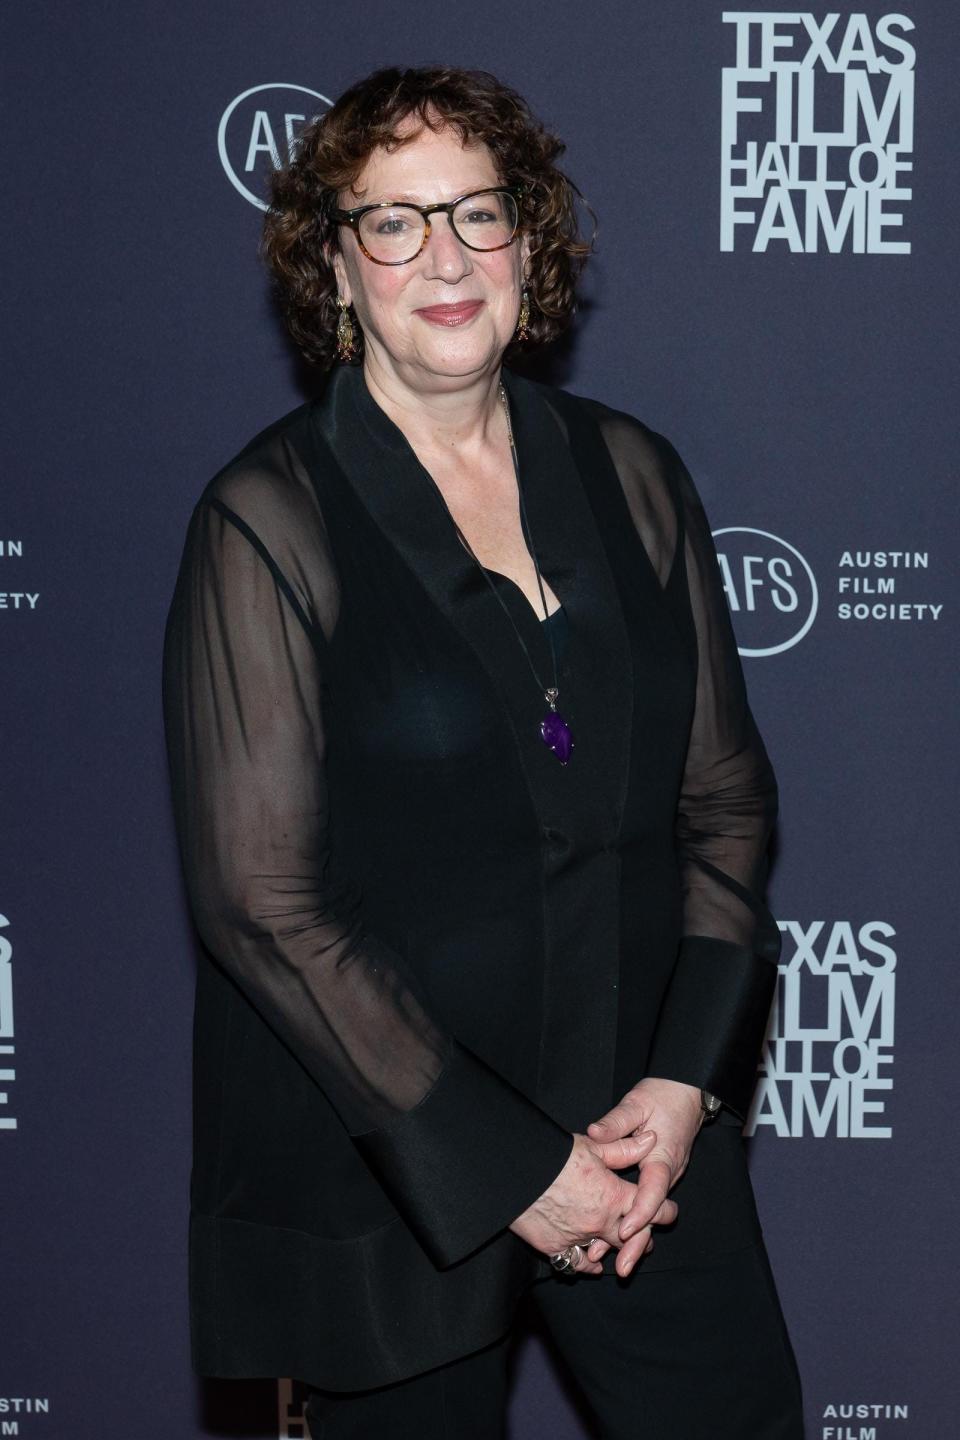 Janet Pierson, seen here at the Texas Film Awards in 2020, announced this year that she would step down as director of SXSW Film & TV Festival.